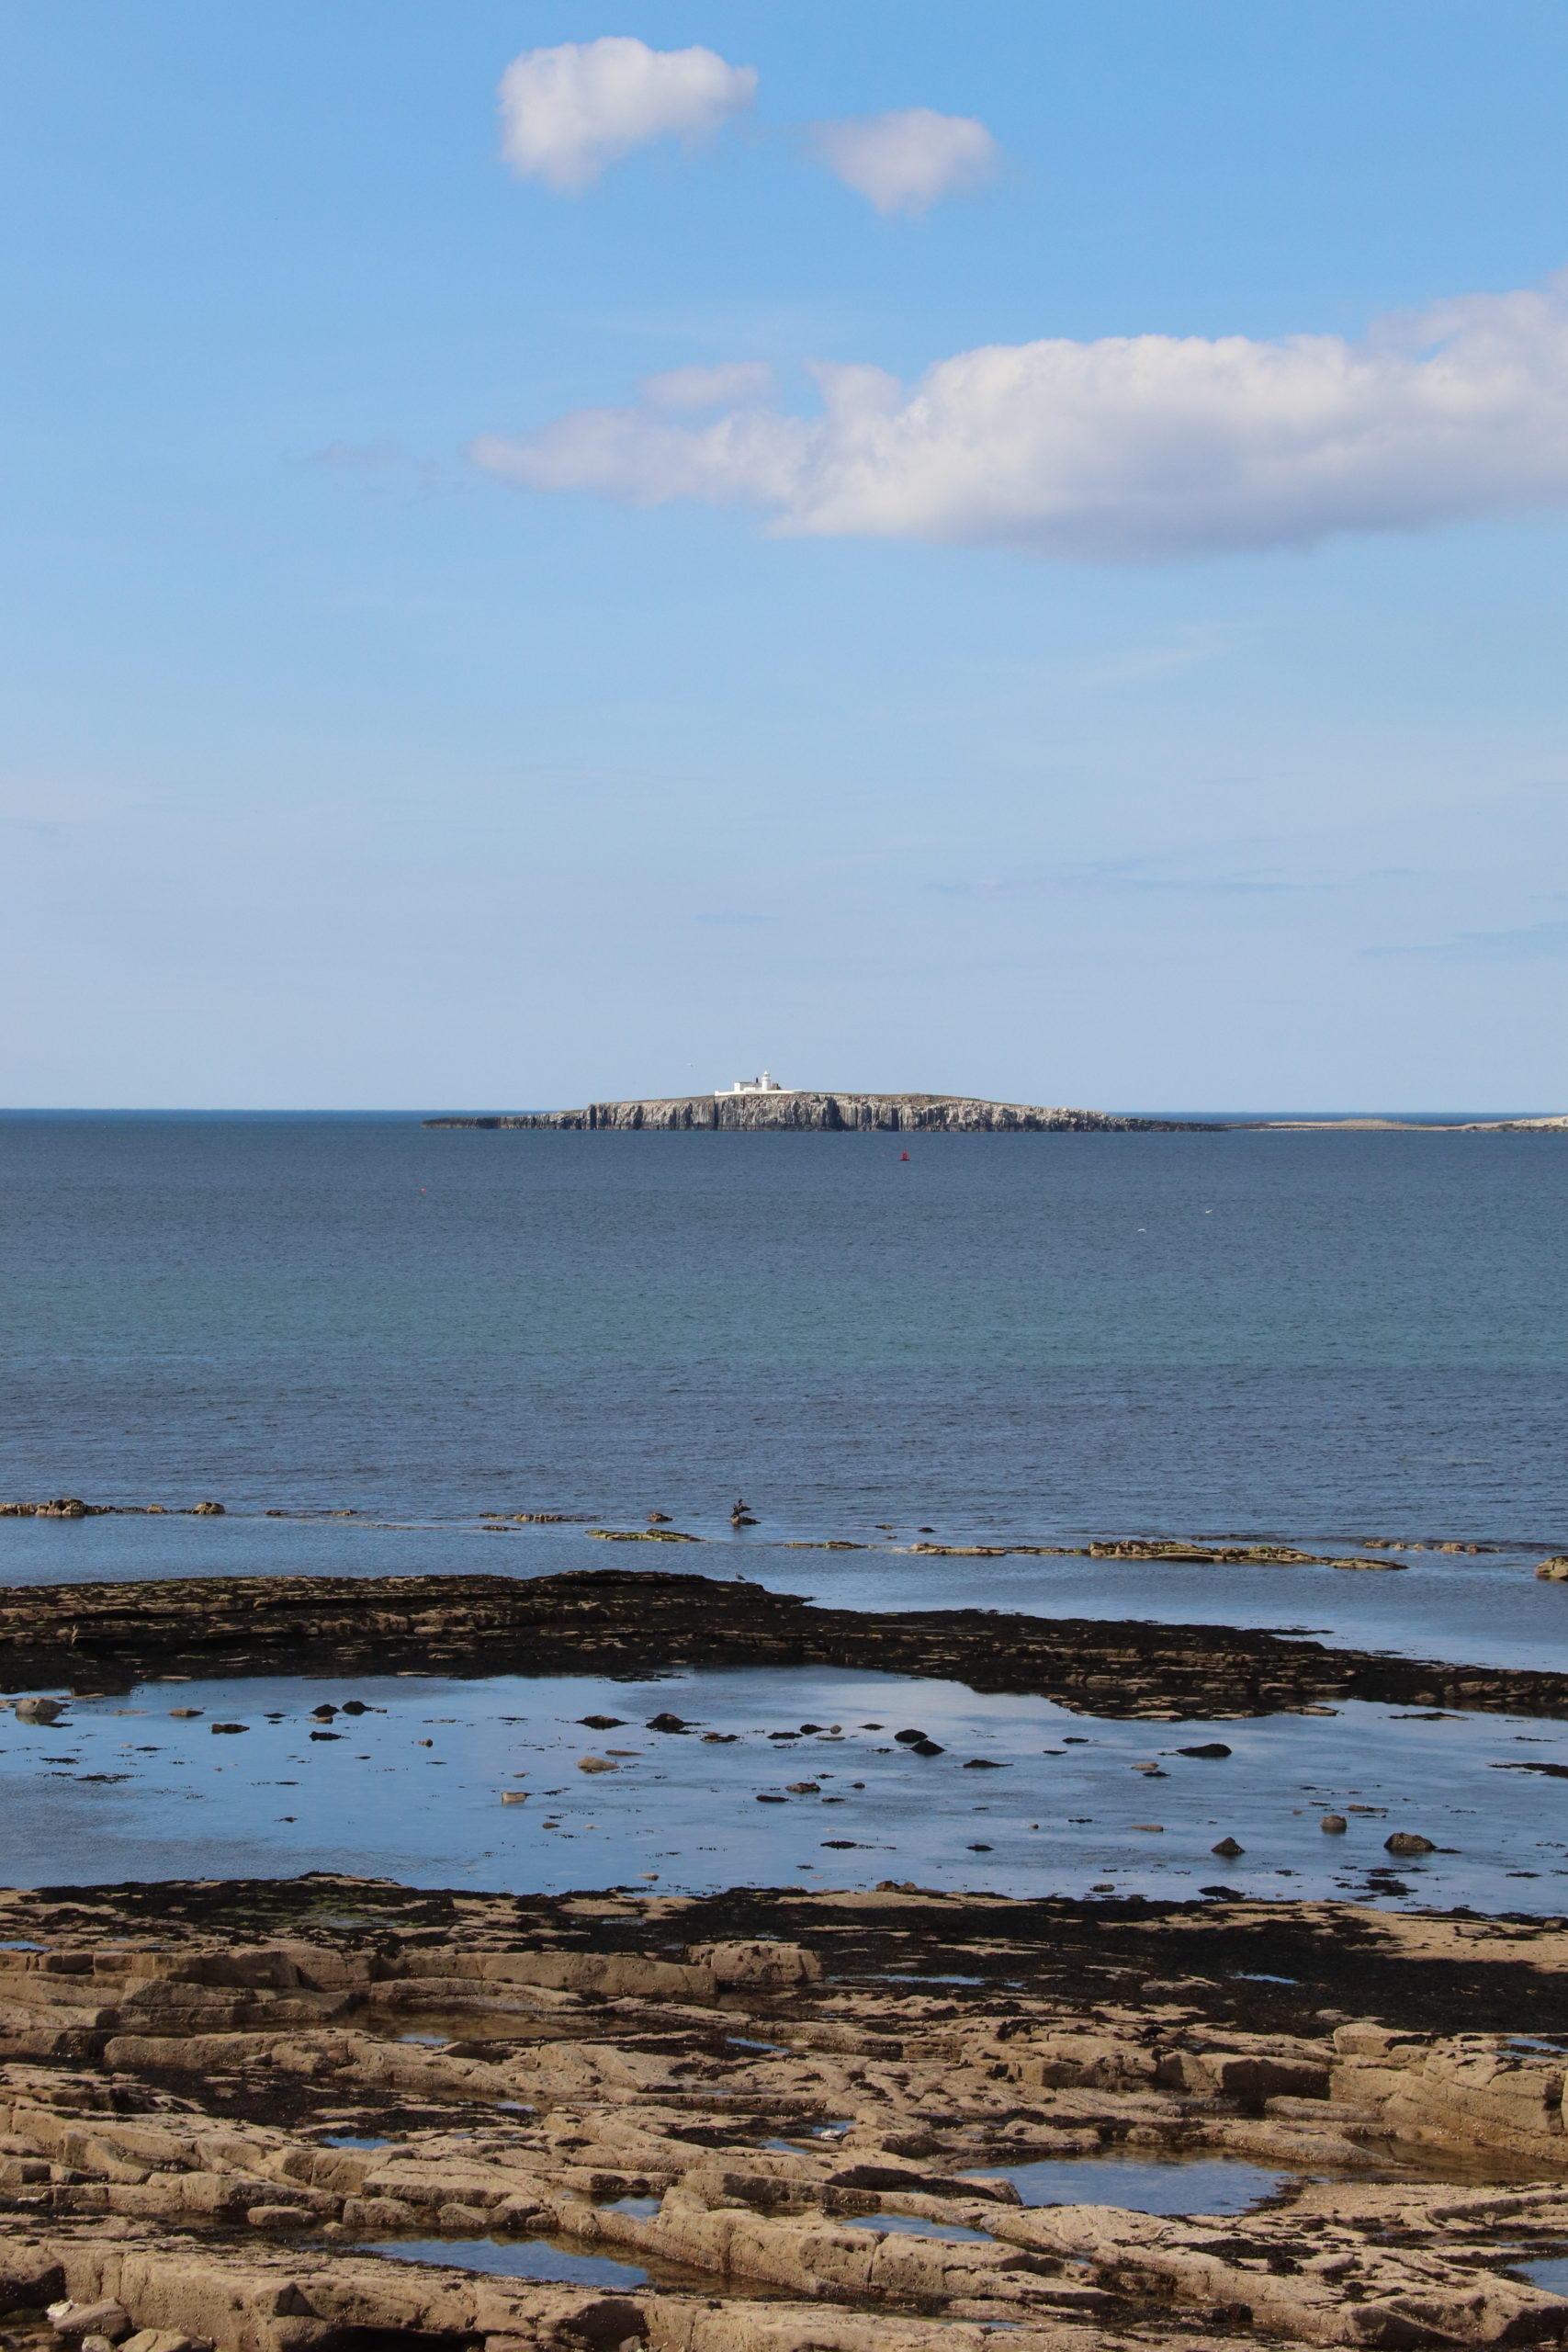 A view of the Farne Islands from Seahouses. There is a white building on the nearest island which is Inner Farne. 